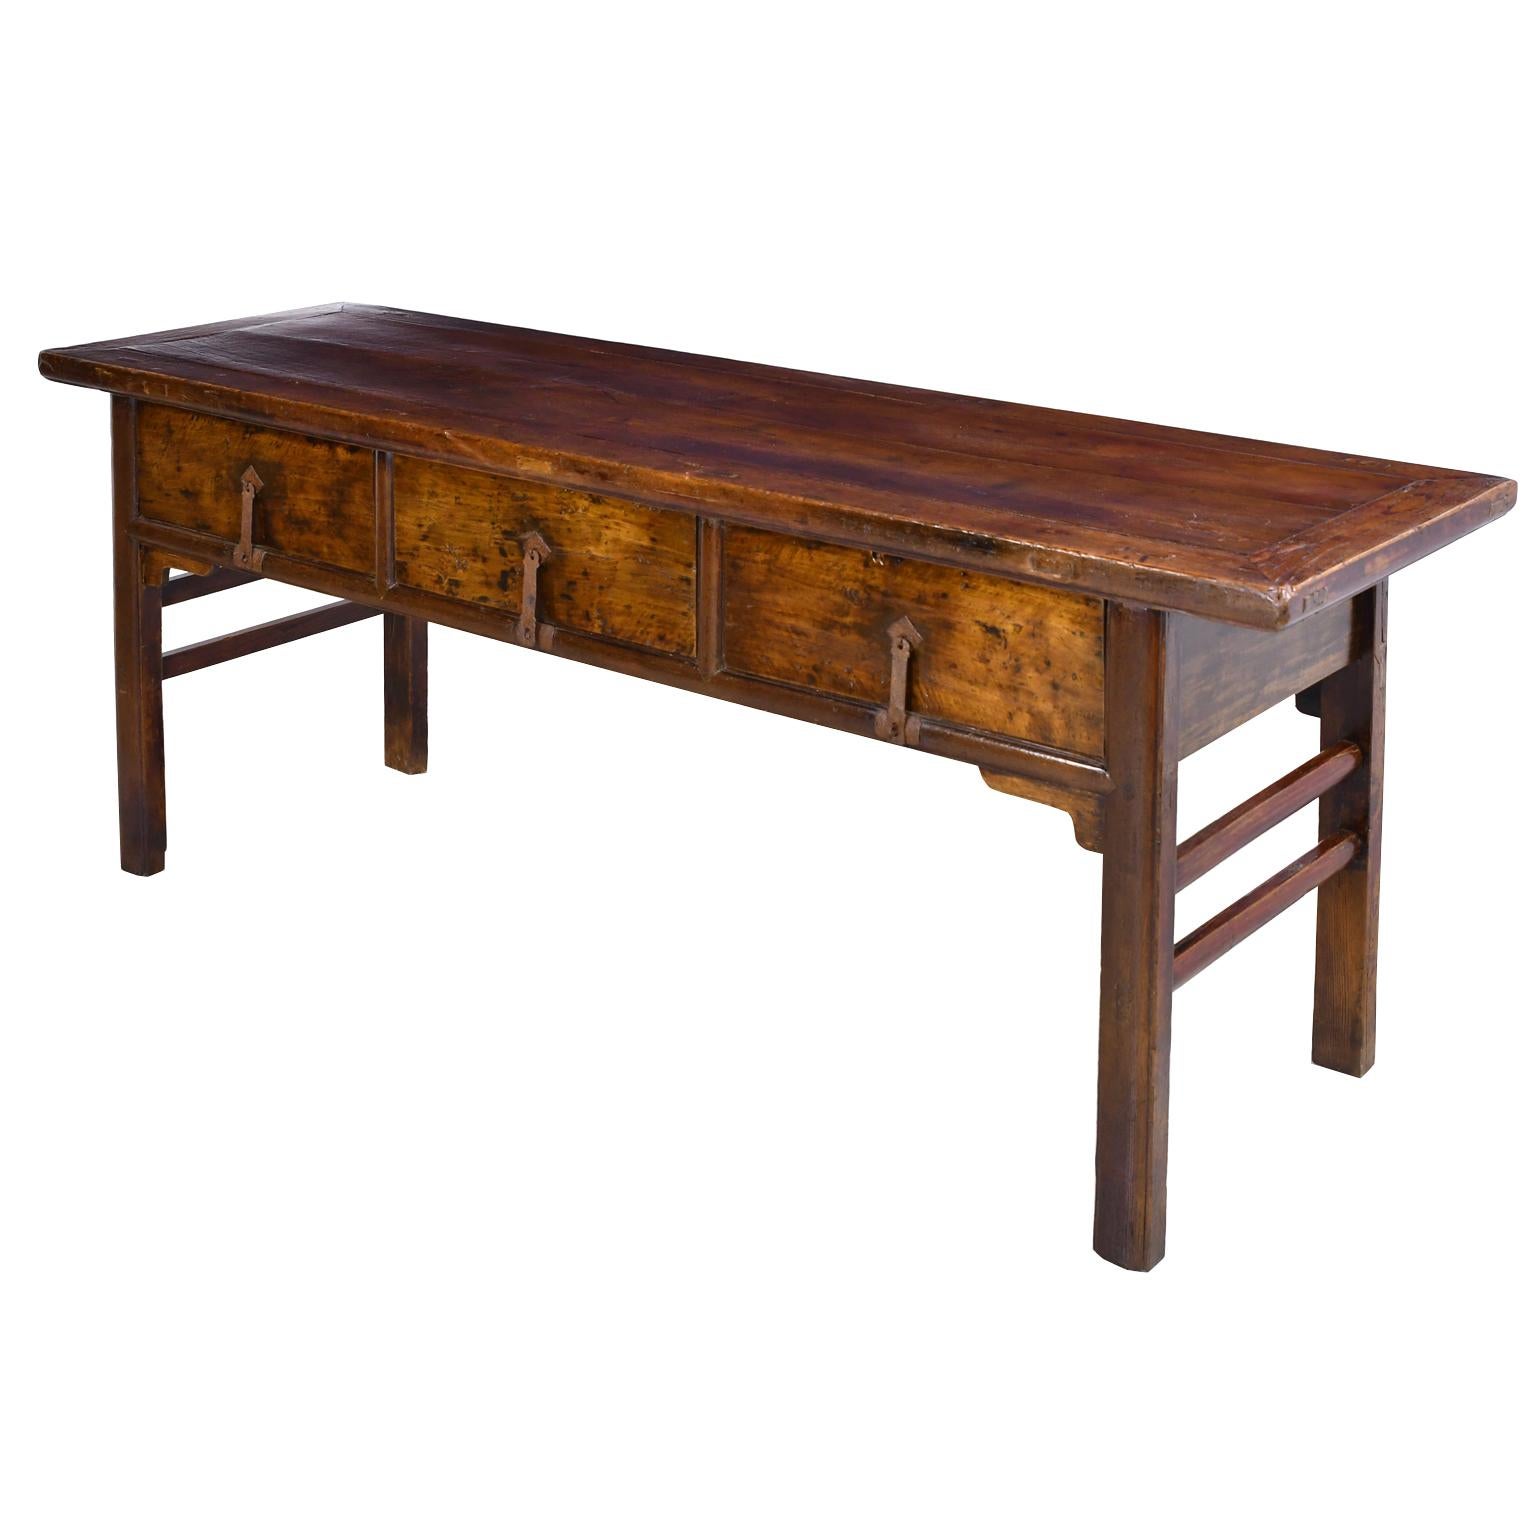 A 19th century Chinese Qing altar table in elm with a thick rectangular top over a base with three drawers that rests on square legs with two side stretchers on each end, and three panels along the length of the back. Drawers have original forged